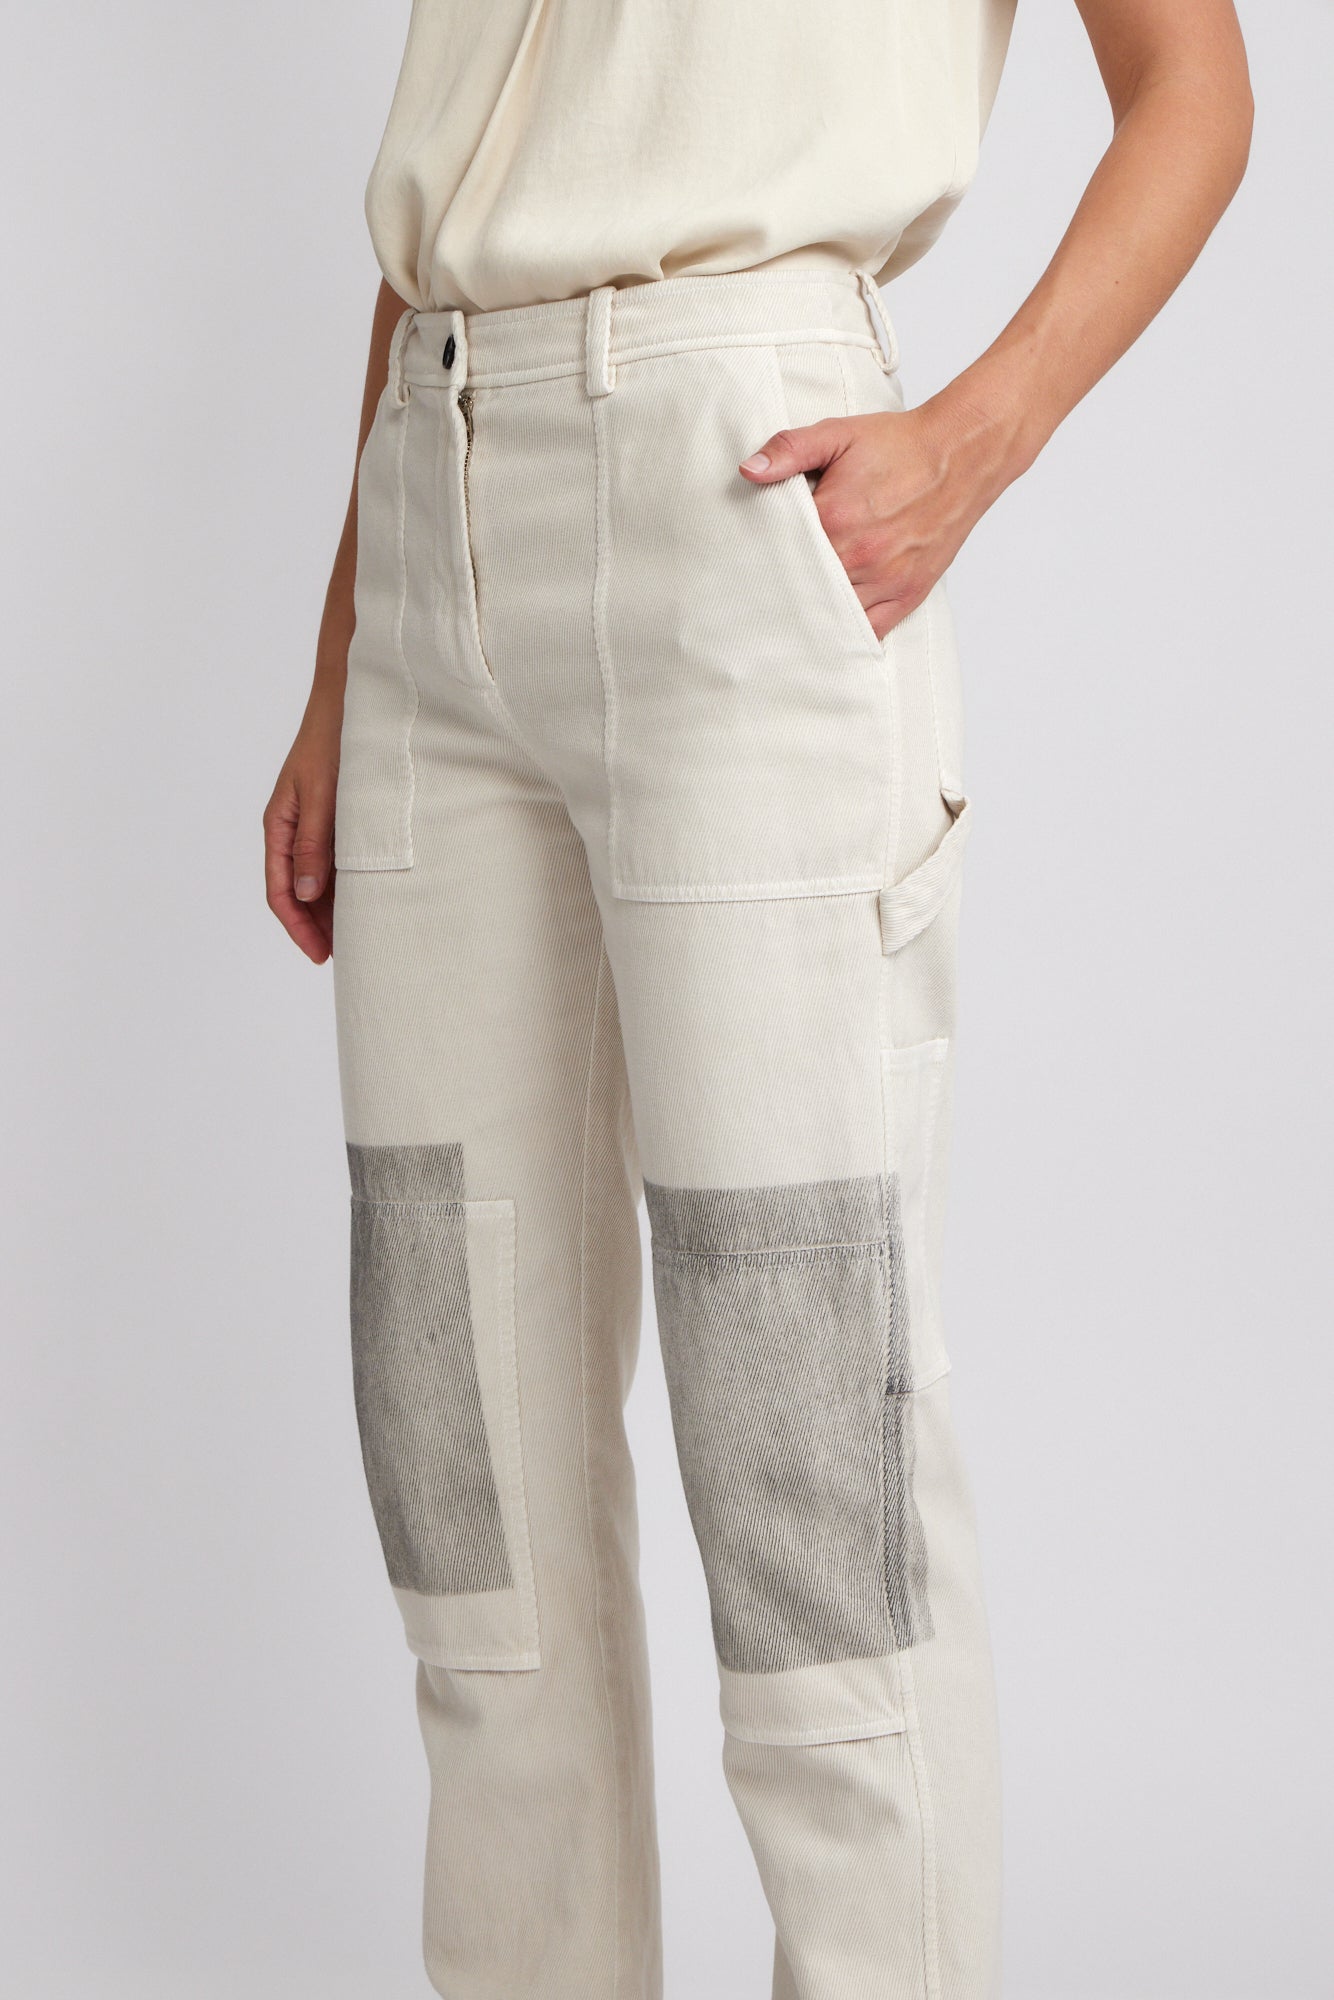 Ivory Black Paint Faille Work Pant Side Close-Up View